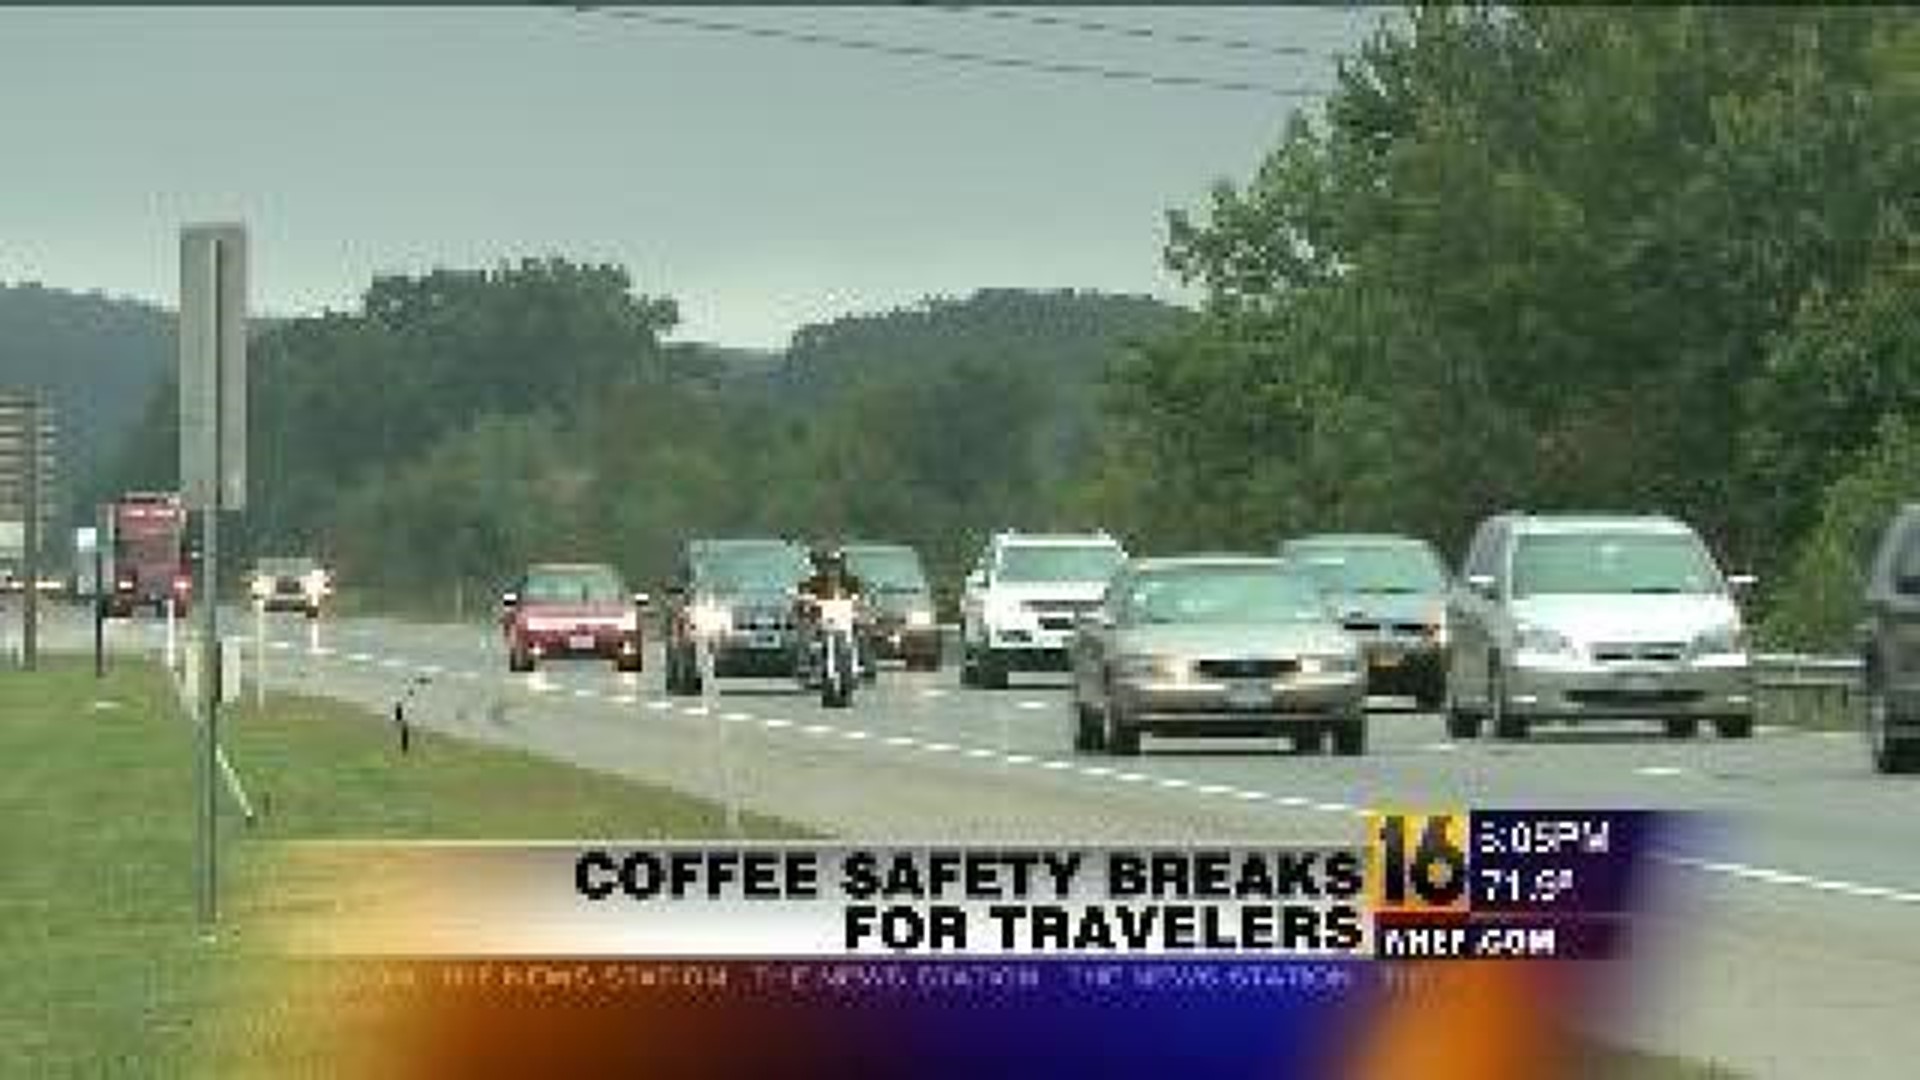 Coffee Safety Break for Travelers